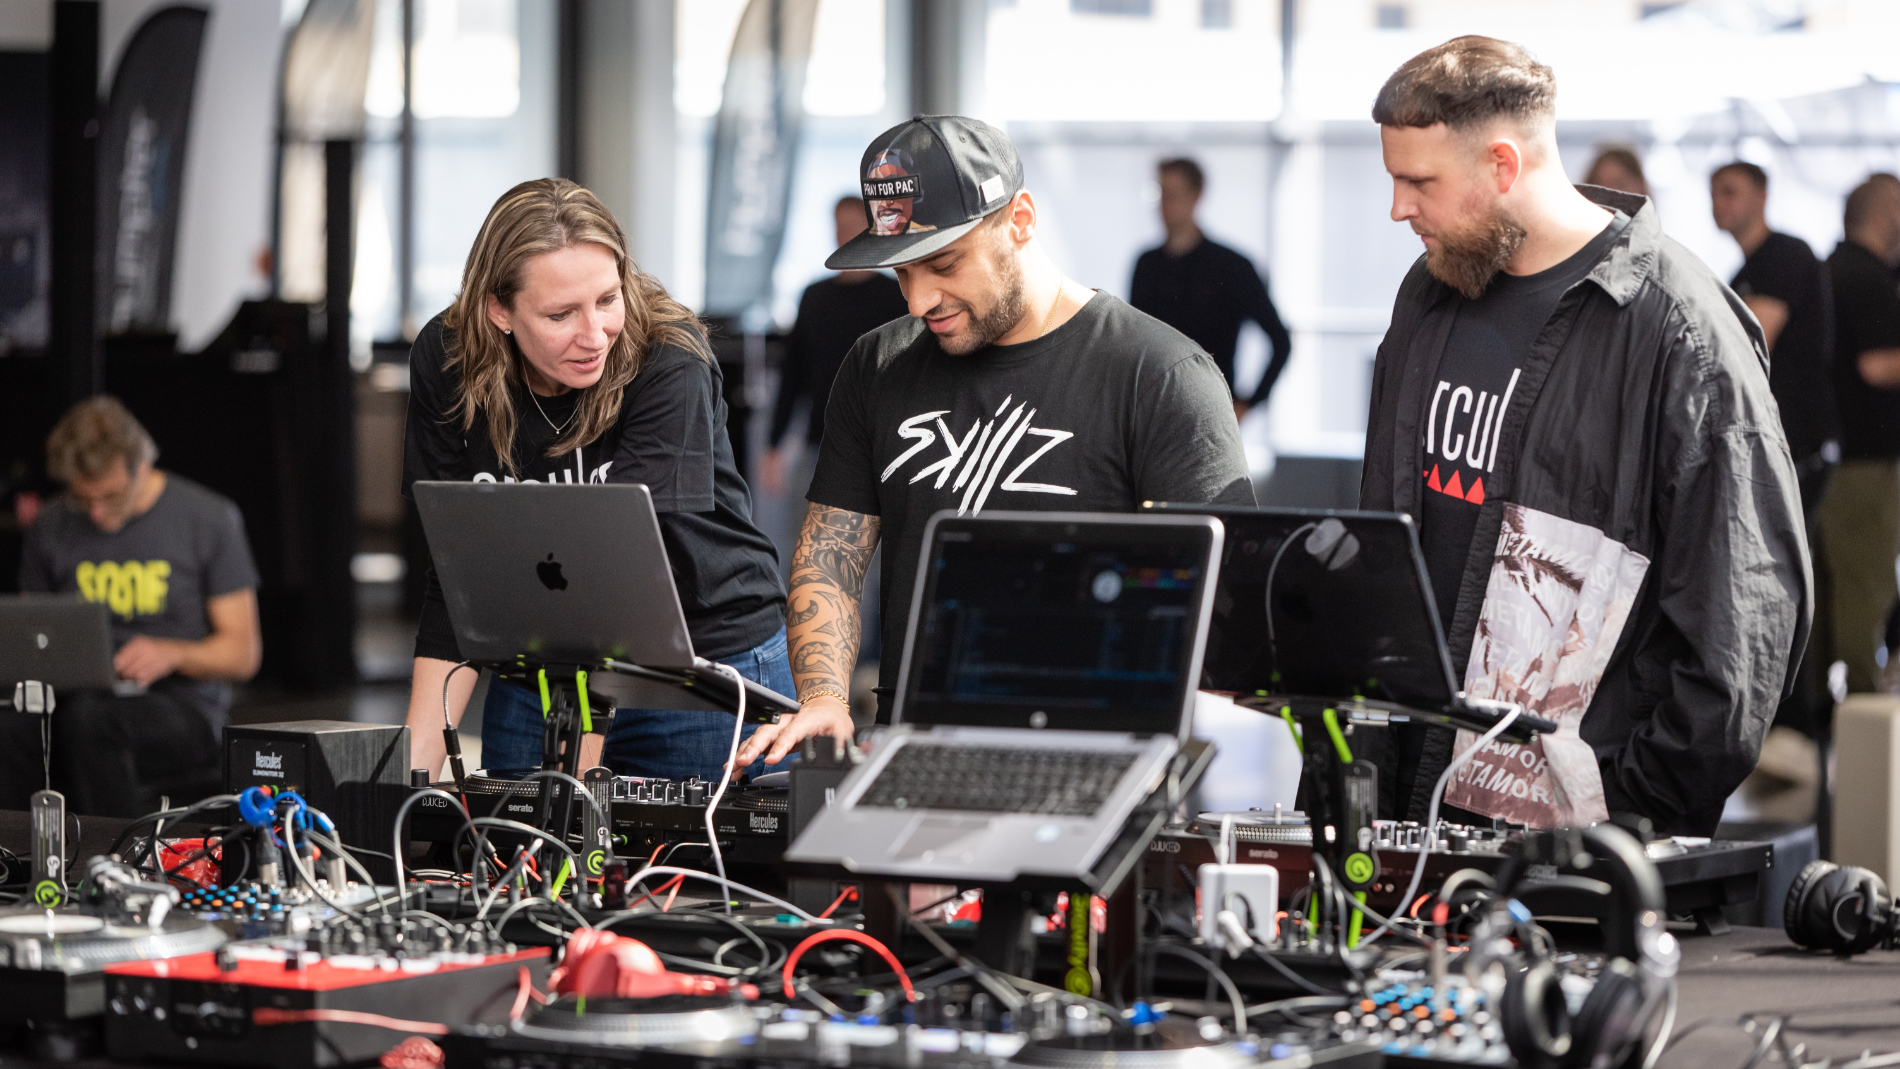 The Performance + Production Hub combines product experience, knowledge transfer and entertainment in a unique way. (Photo: Mathias Kutt)